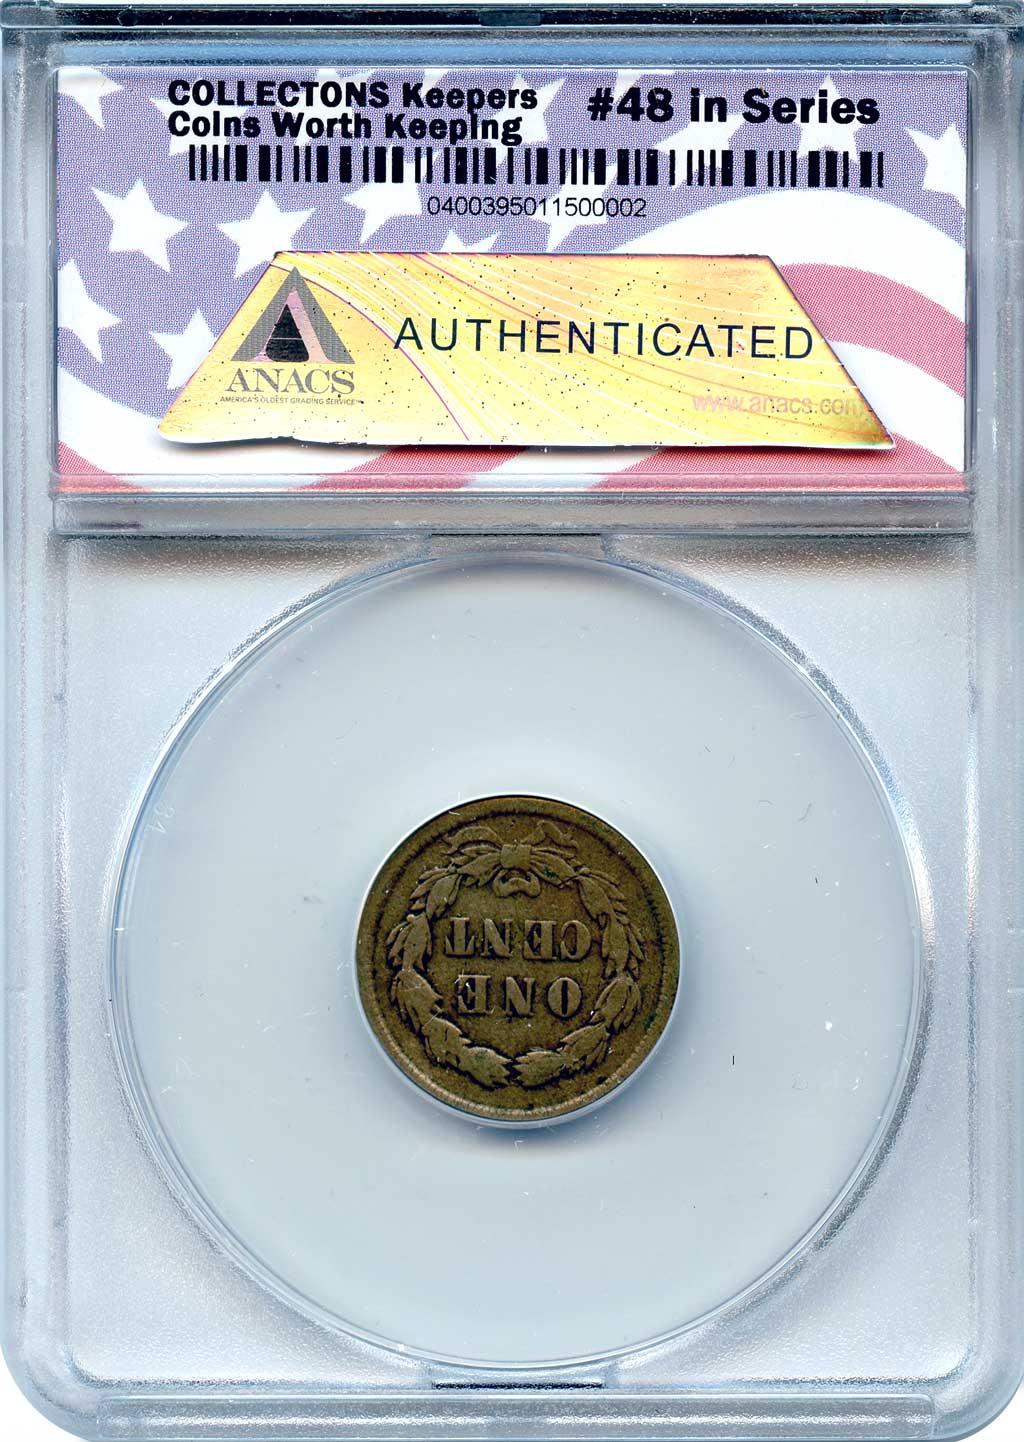 CollecTons Keepers #48: 1859 Type 1 Indian Head Cent with Laurel Wreath Certified in Exclusive ANACS Circulated Holder